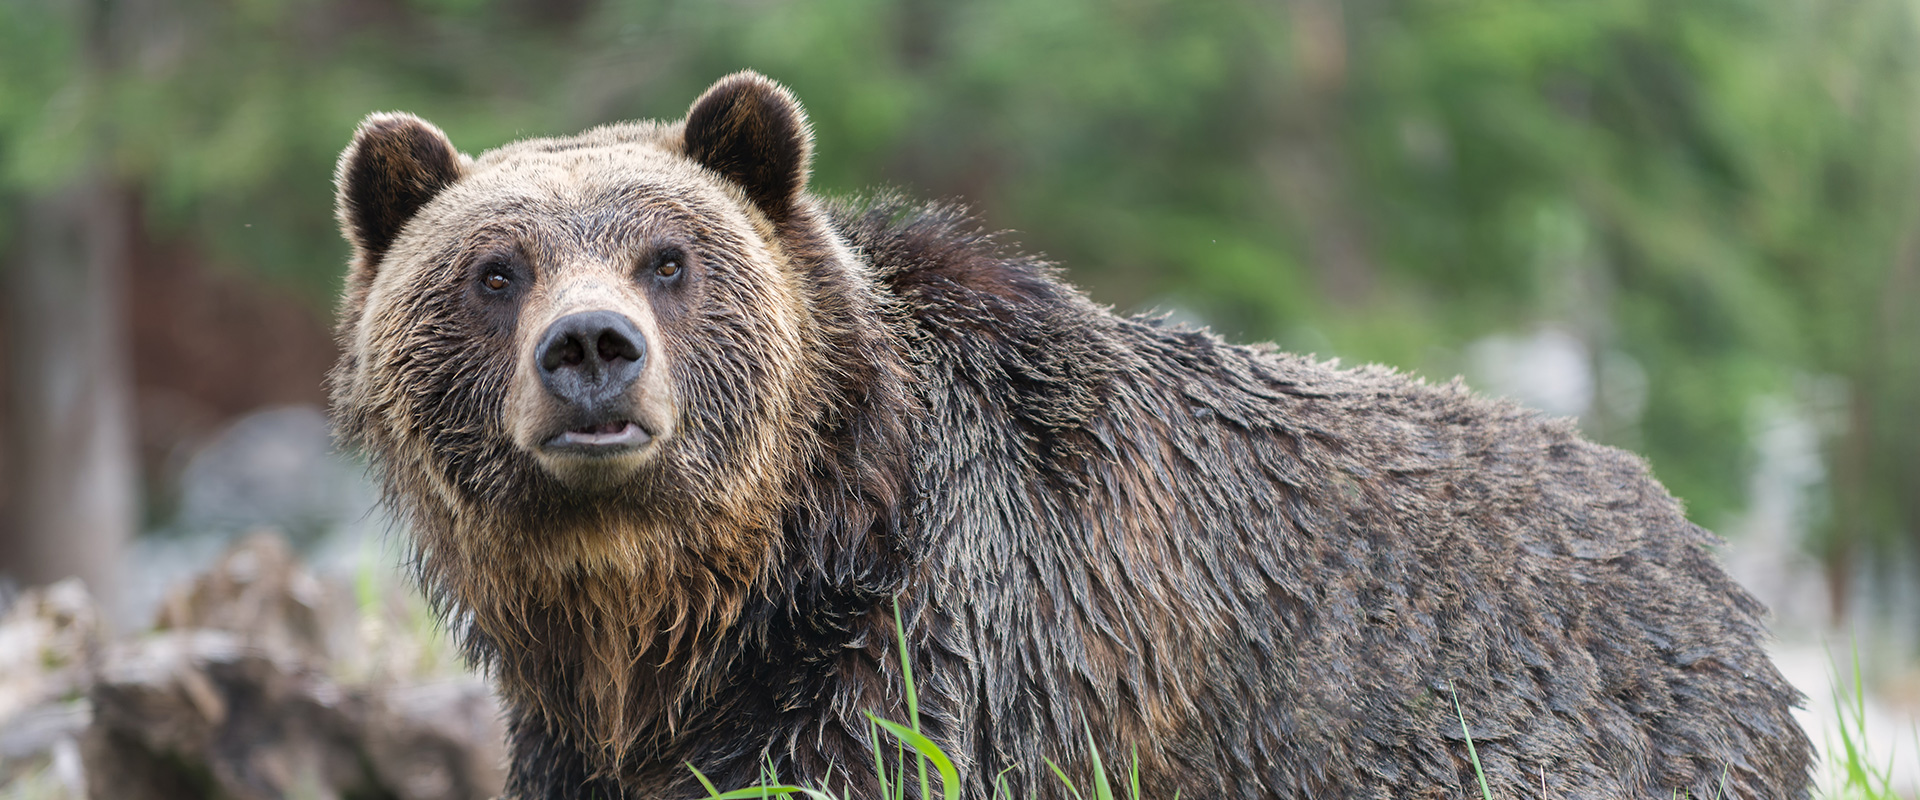 Single large wet grizzly bear in the forest